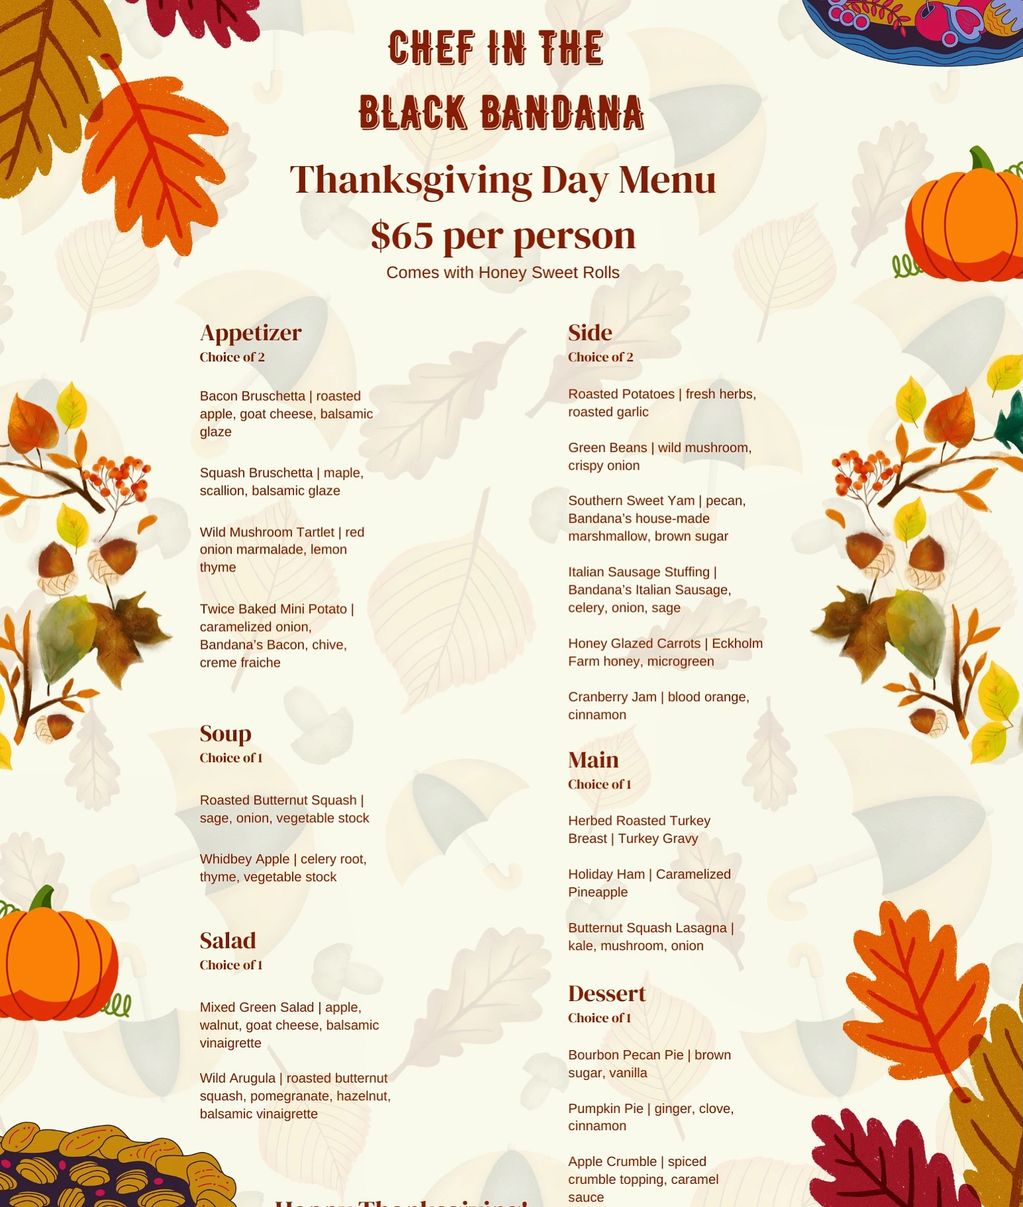 Description of the Chef in The Back Bandana Thanksgiving Day Menu